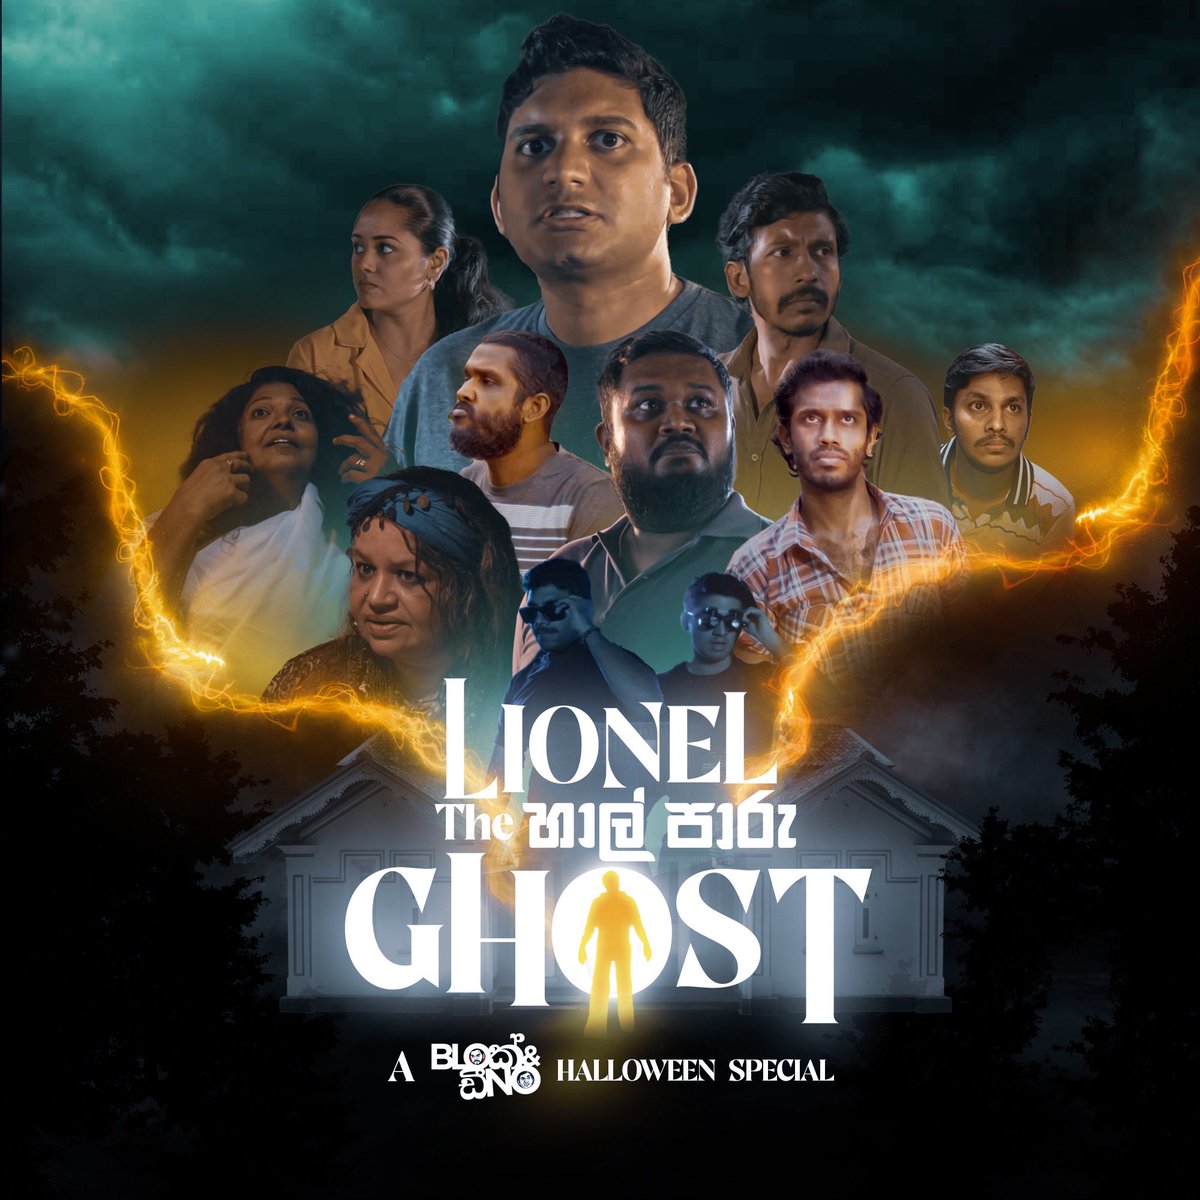 Lionel The හාල් පාරු Ghost...Releasing today! 

A Blok & Dino #halloween Special 👻🎃

#blokanddino #newvideo #lioneltheහාල්පාරුghost #gehanblok #dinocorera #youtube #halloweenspecial